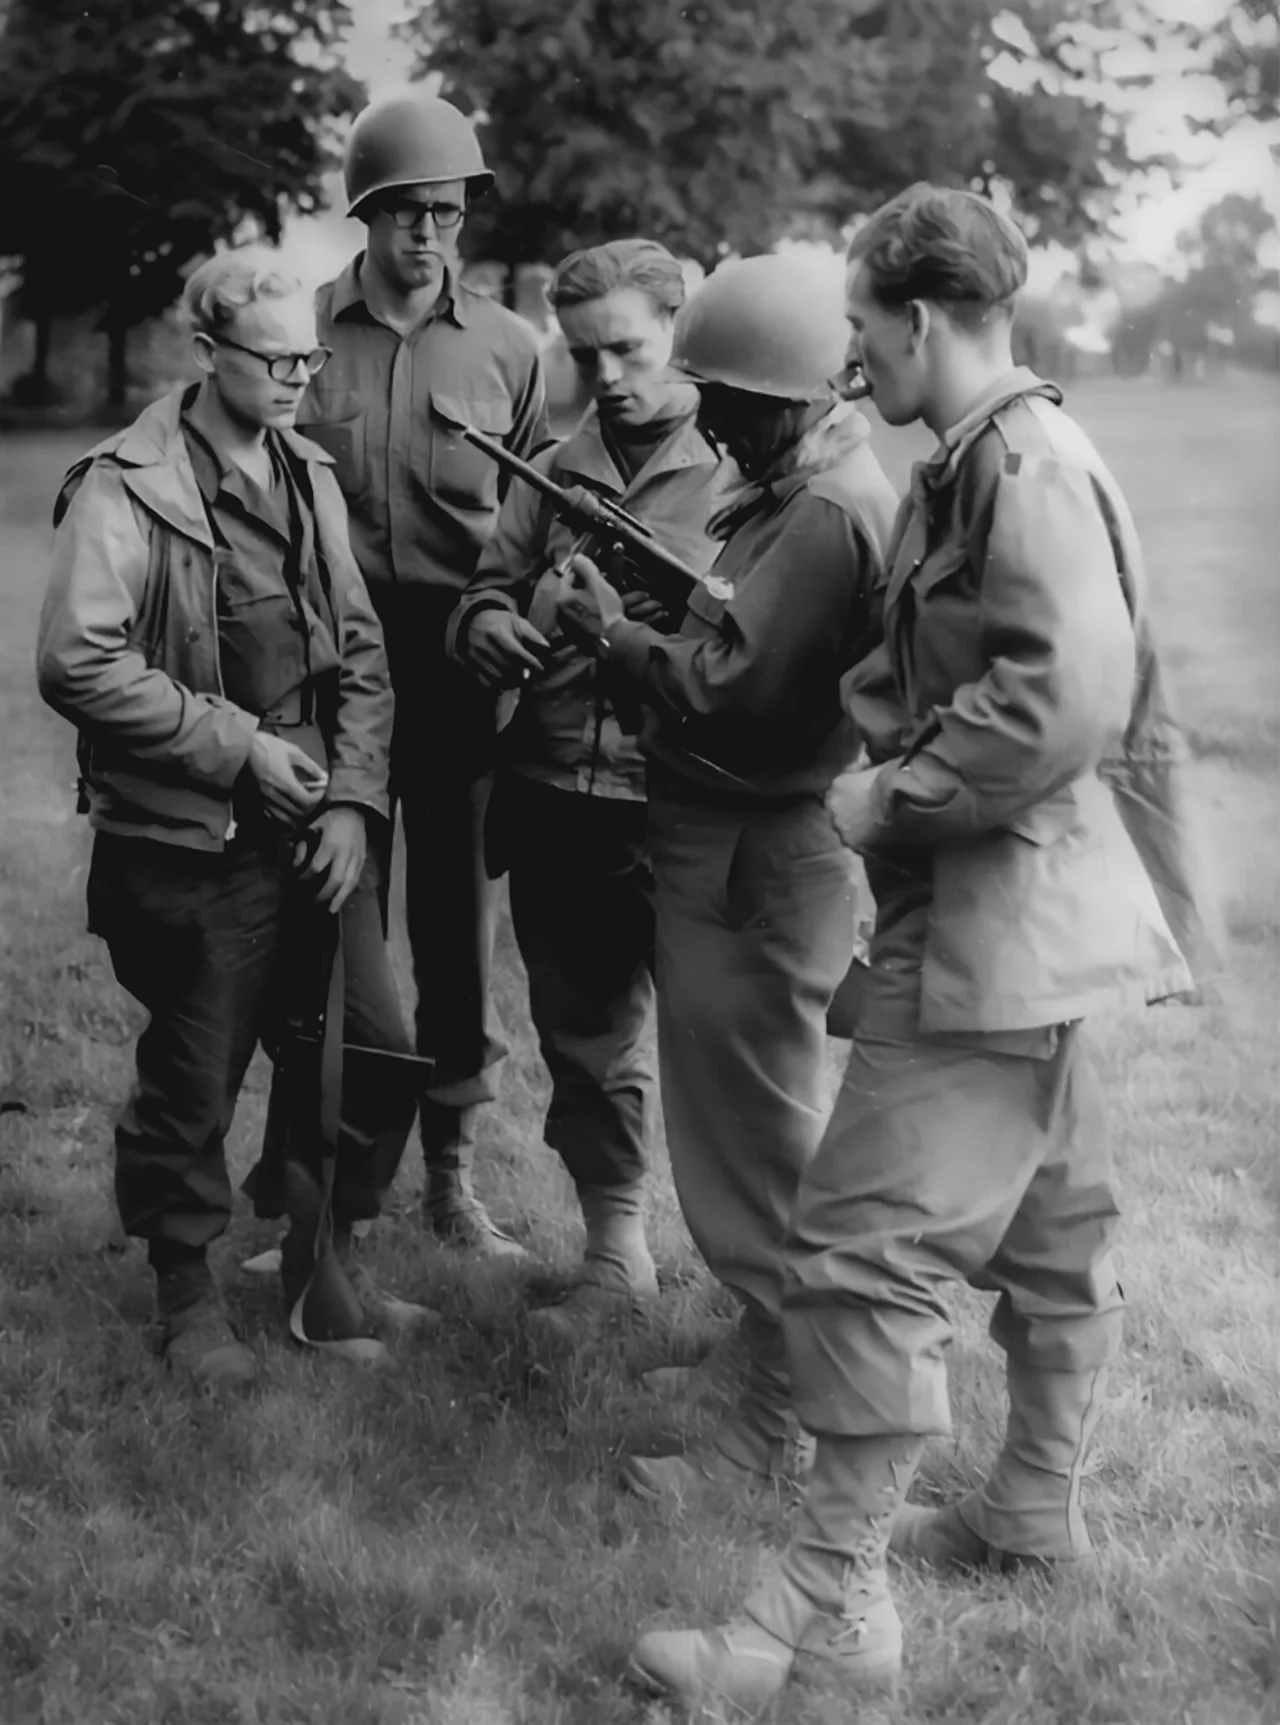 M3 Grease Gun demonstrated to Belgian troops by the U.S. soldier in October 1944